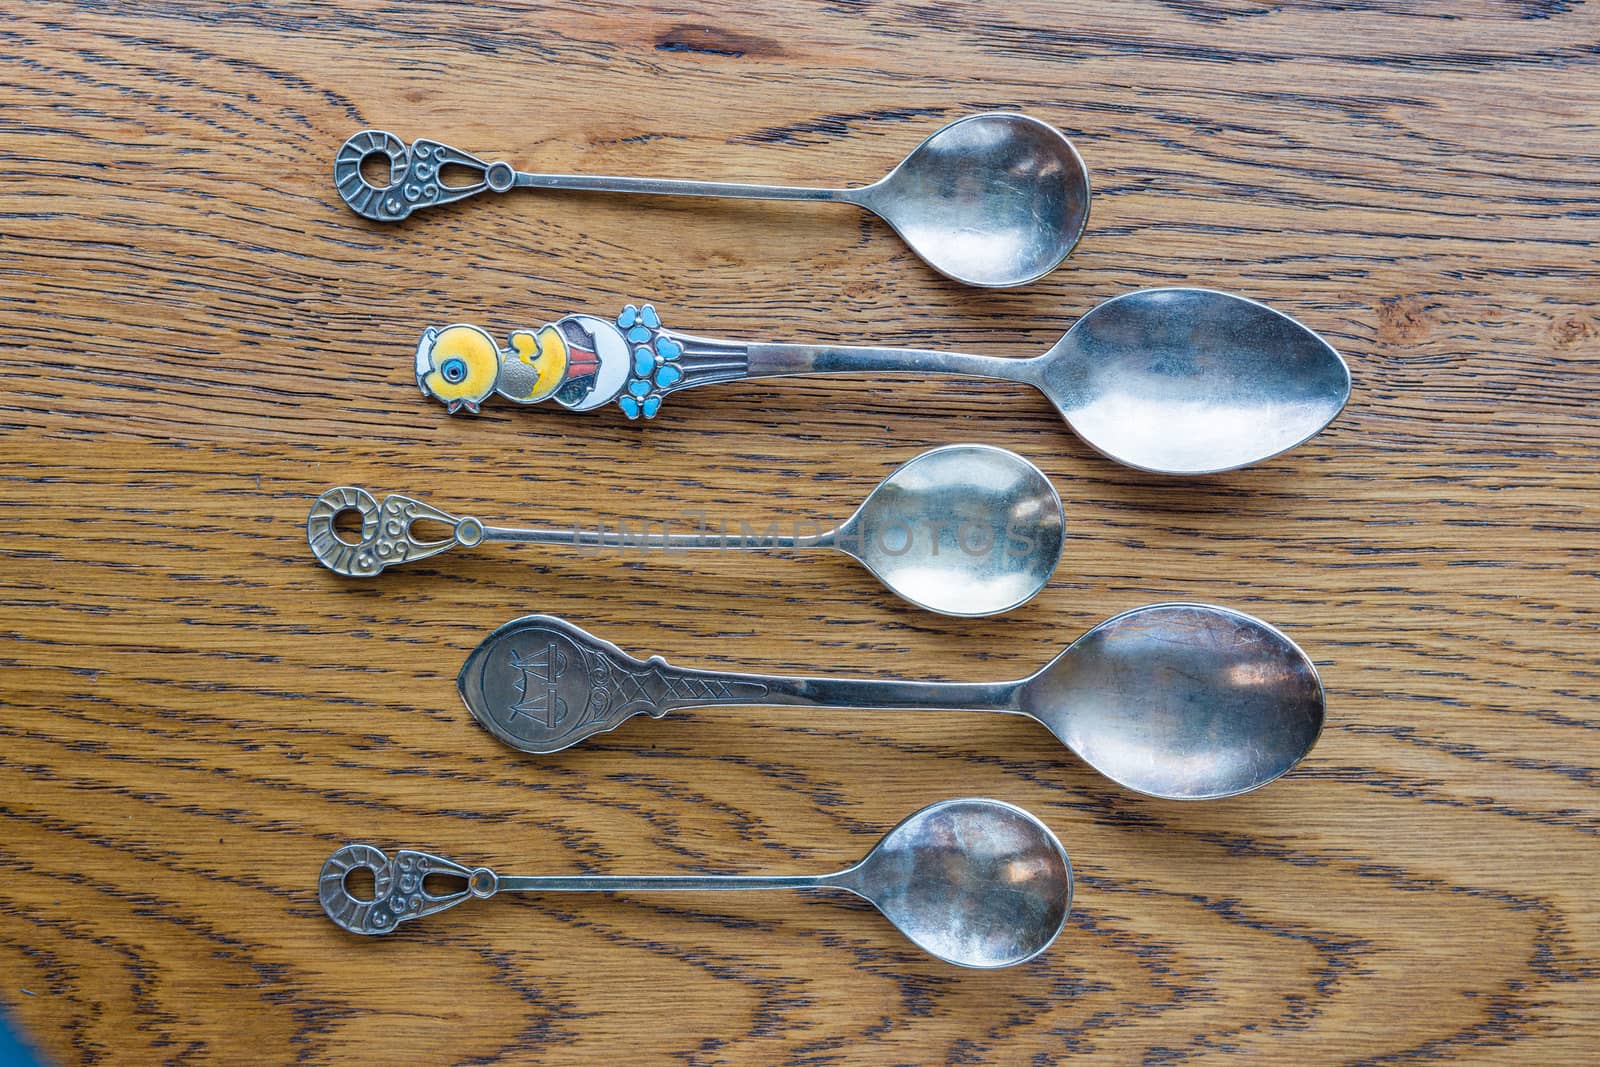 Small, antique spoons of various shapes and sizes lie on an oak table.